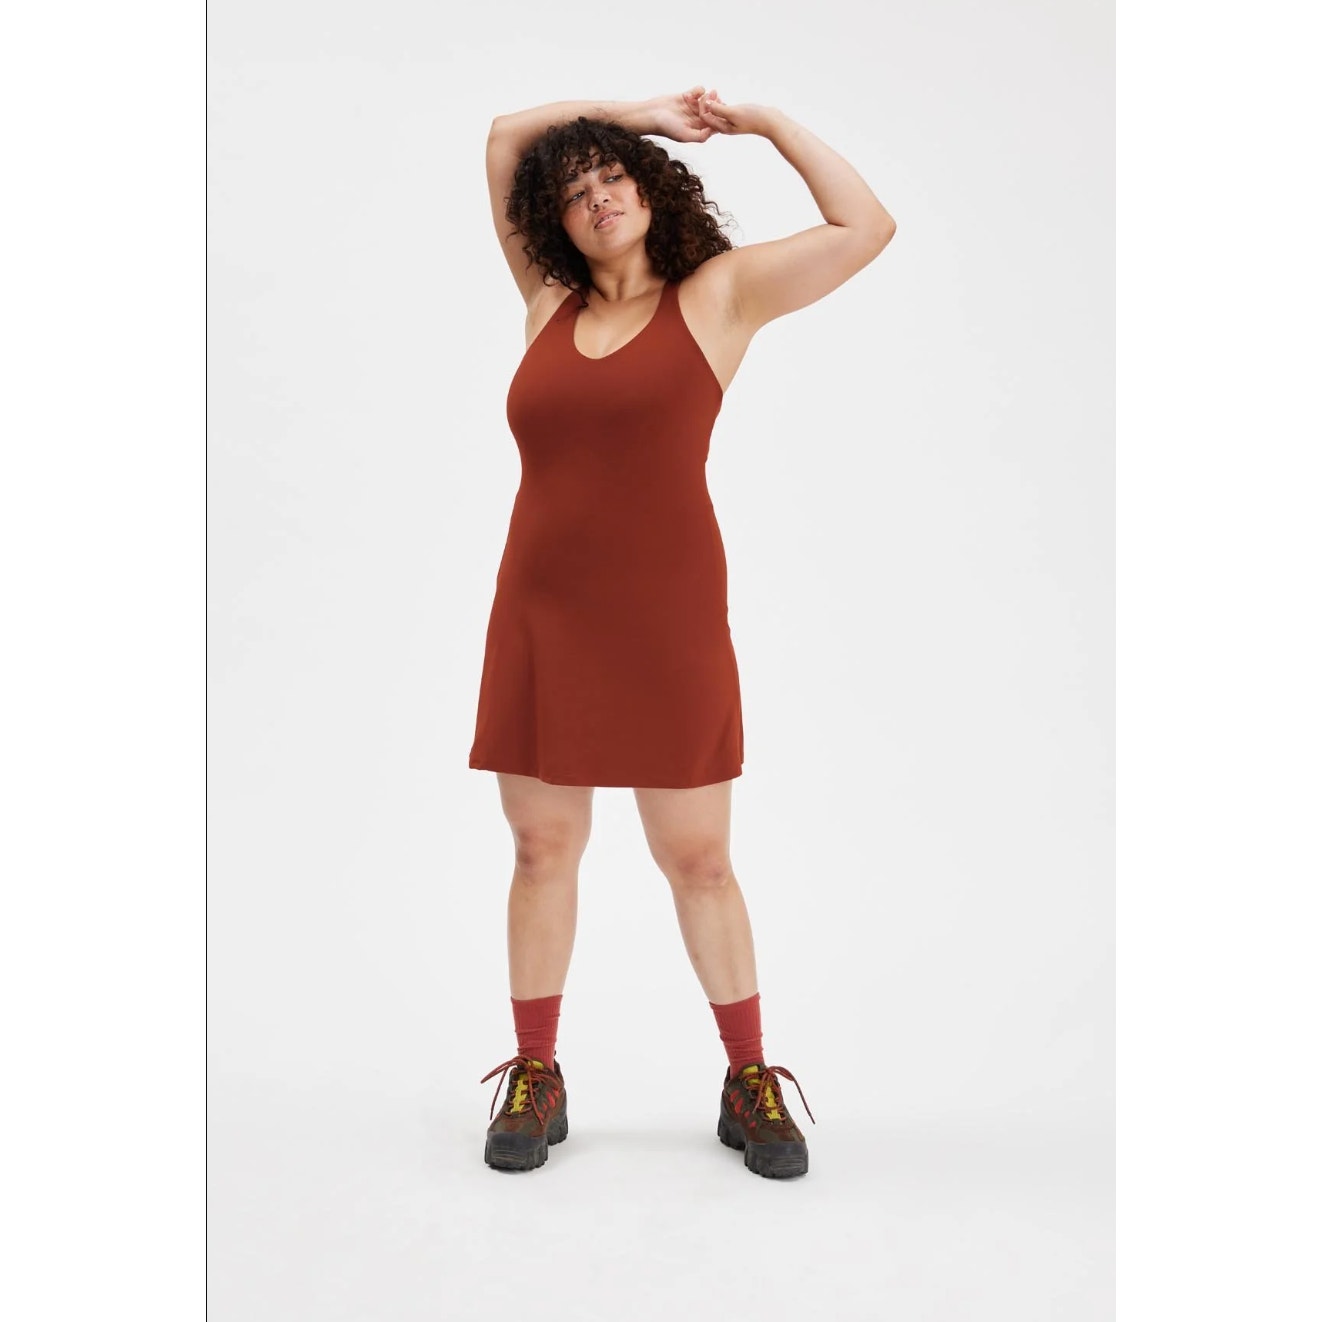 Girlfriend Collective NWT Mahogany Lola V-Neck Dress Brown/Red Size XXS